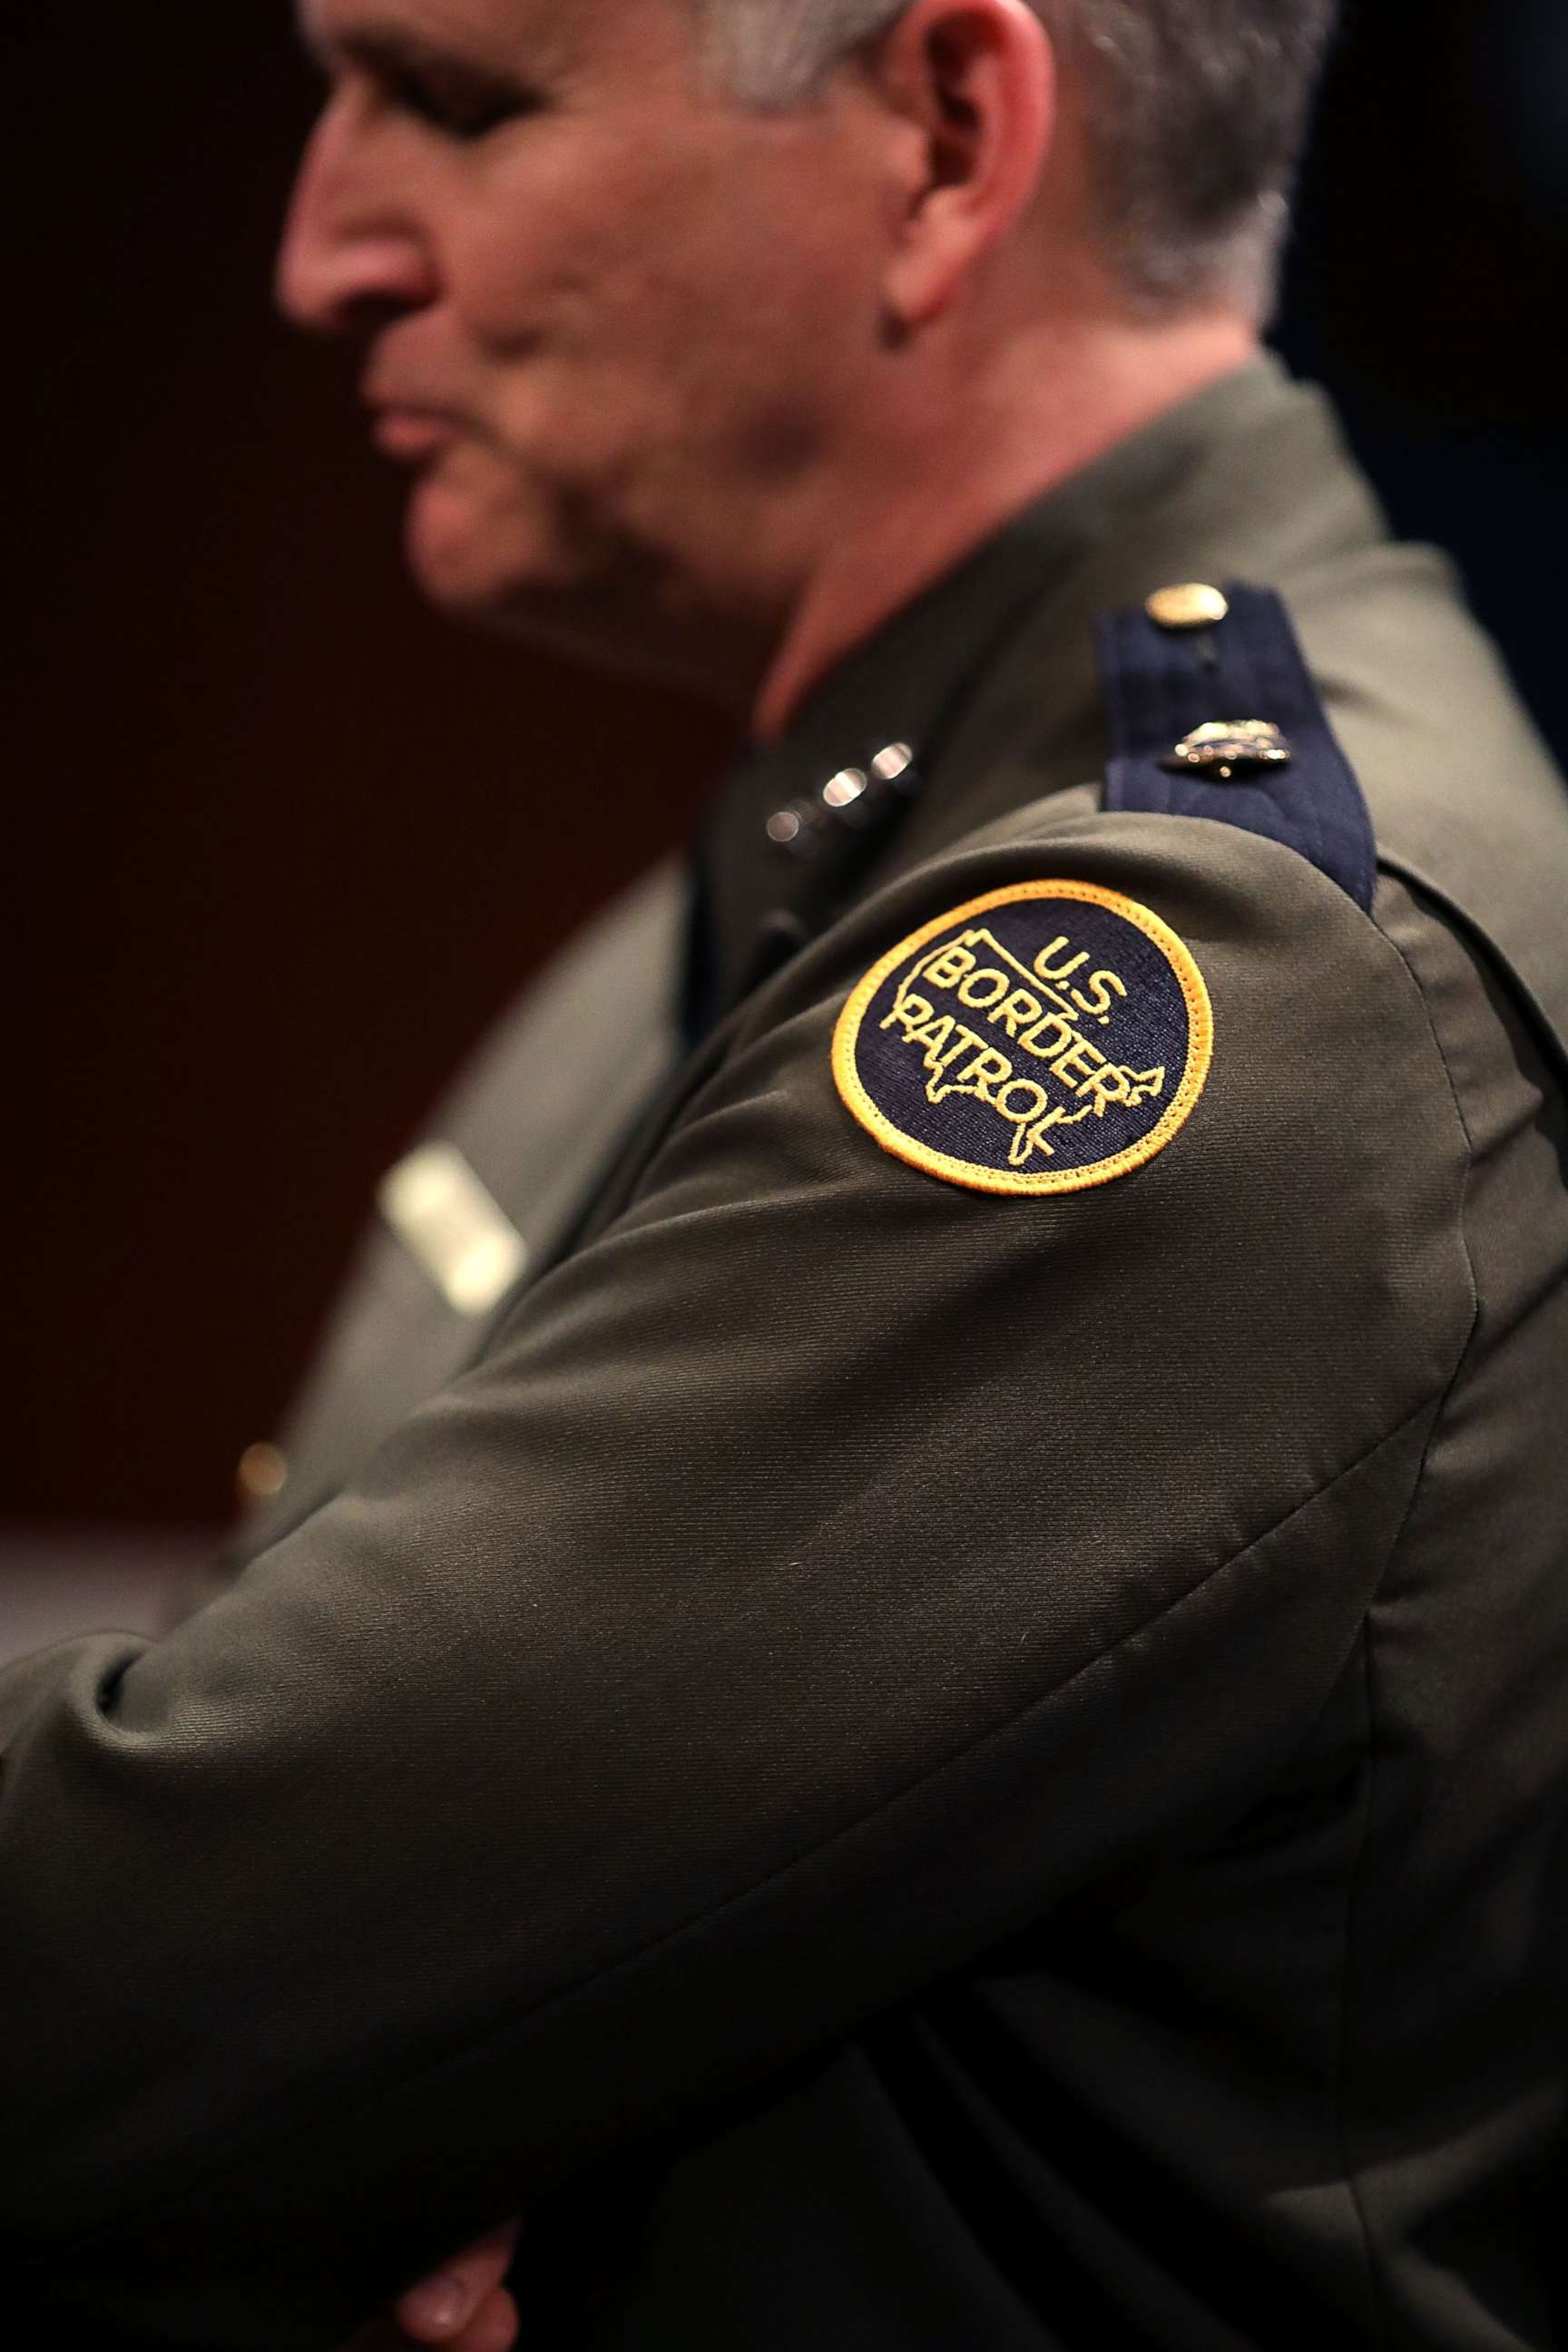 PHOTO: Homeland Security Department Joint Task Force West Director Paul Beeson of the U.S. Border Patrol prepares to testify before the House Homeland Security Committee's Border and Maritime Security Subcommittee, April 4, 2017, in Washington.